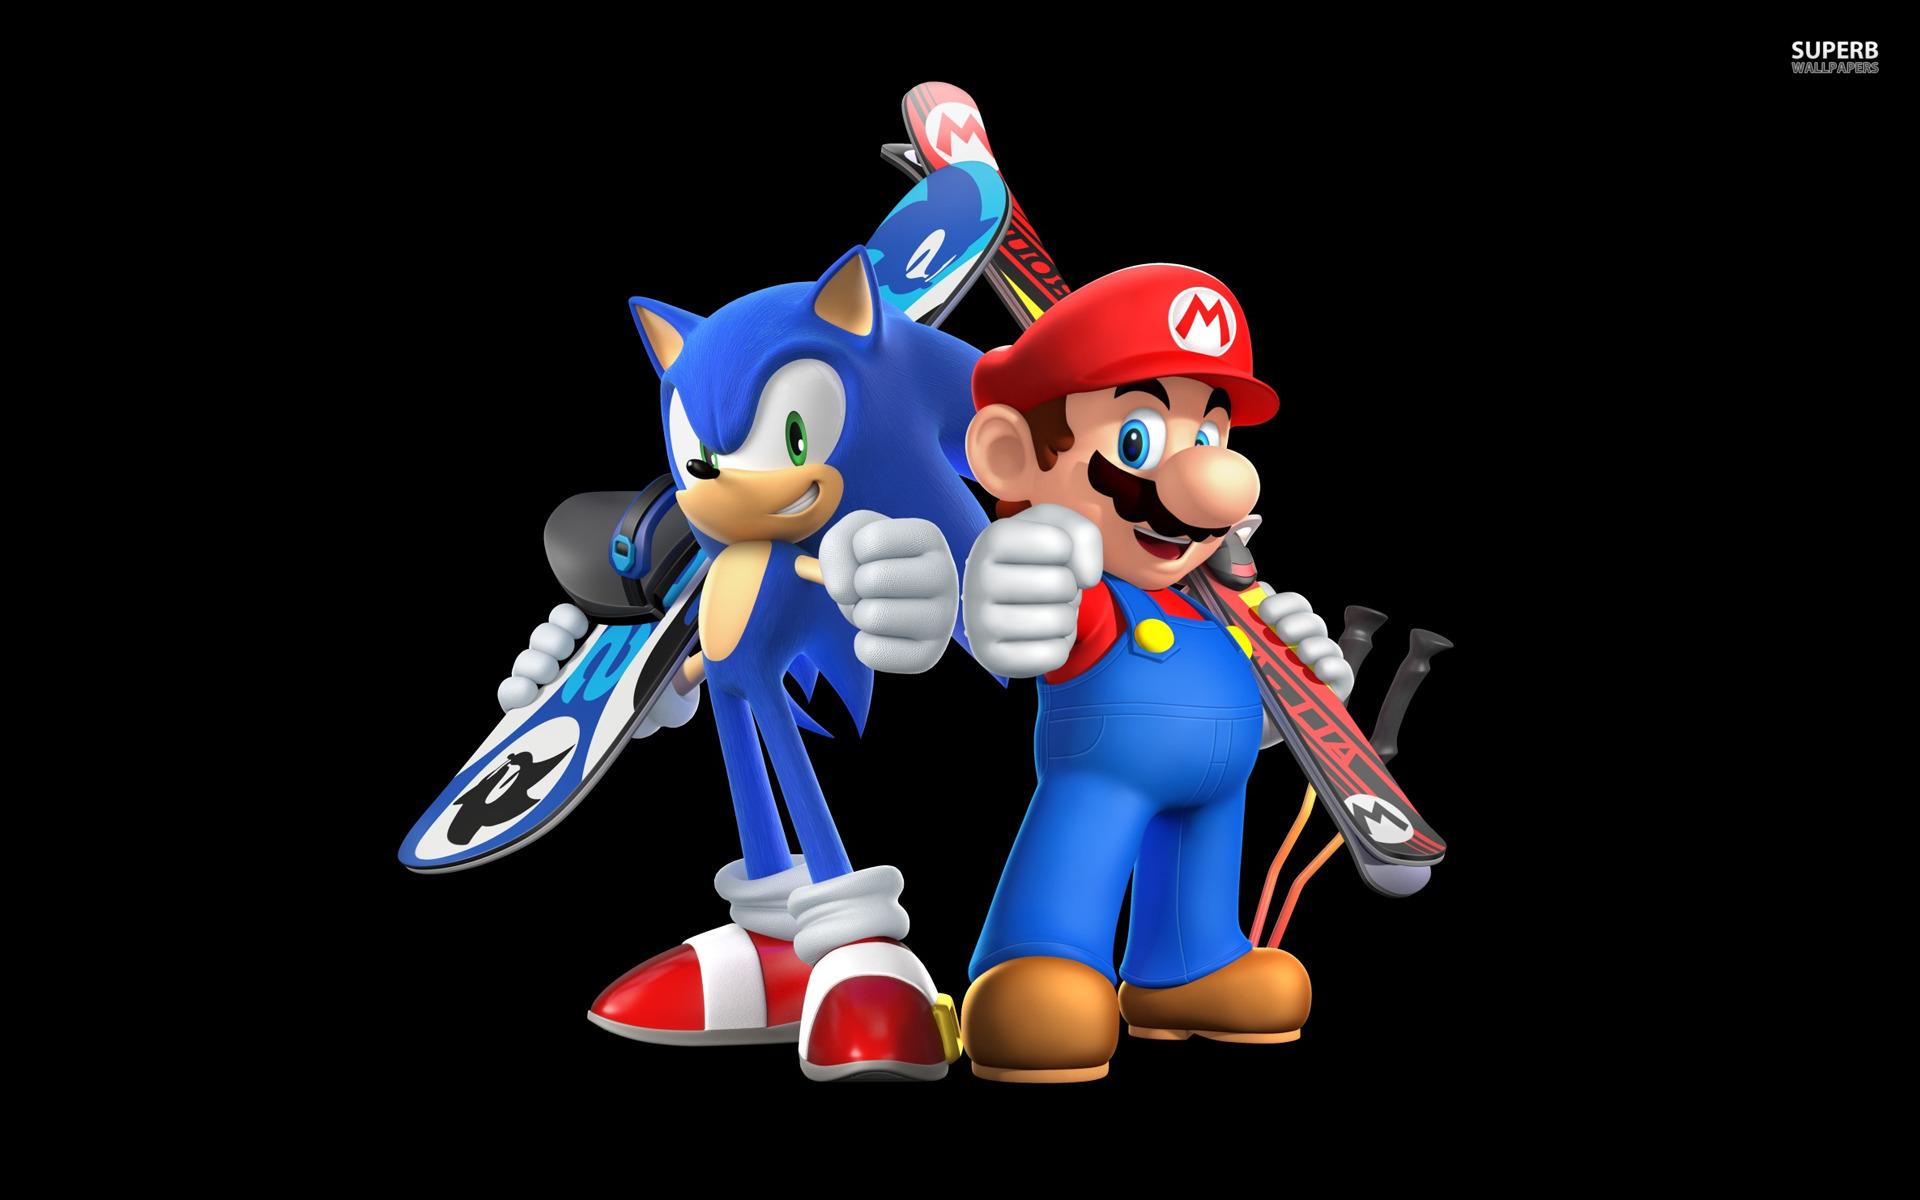 Mario & Sonic: Mario and Sonic at the Olympic Winter Games (Sochi, 2014)